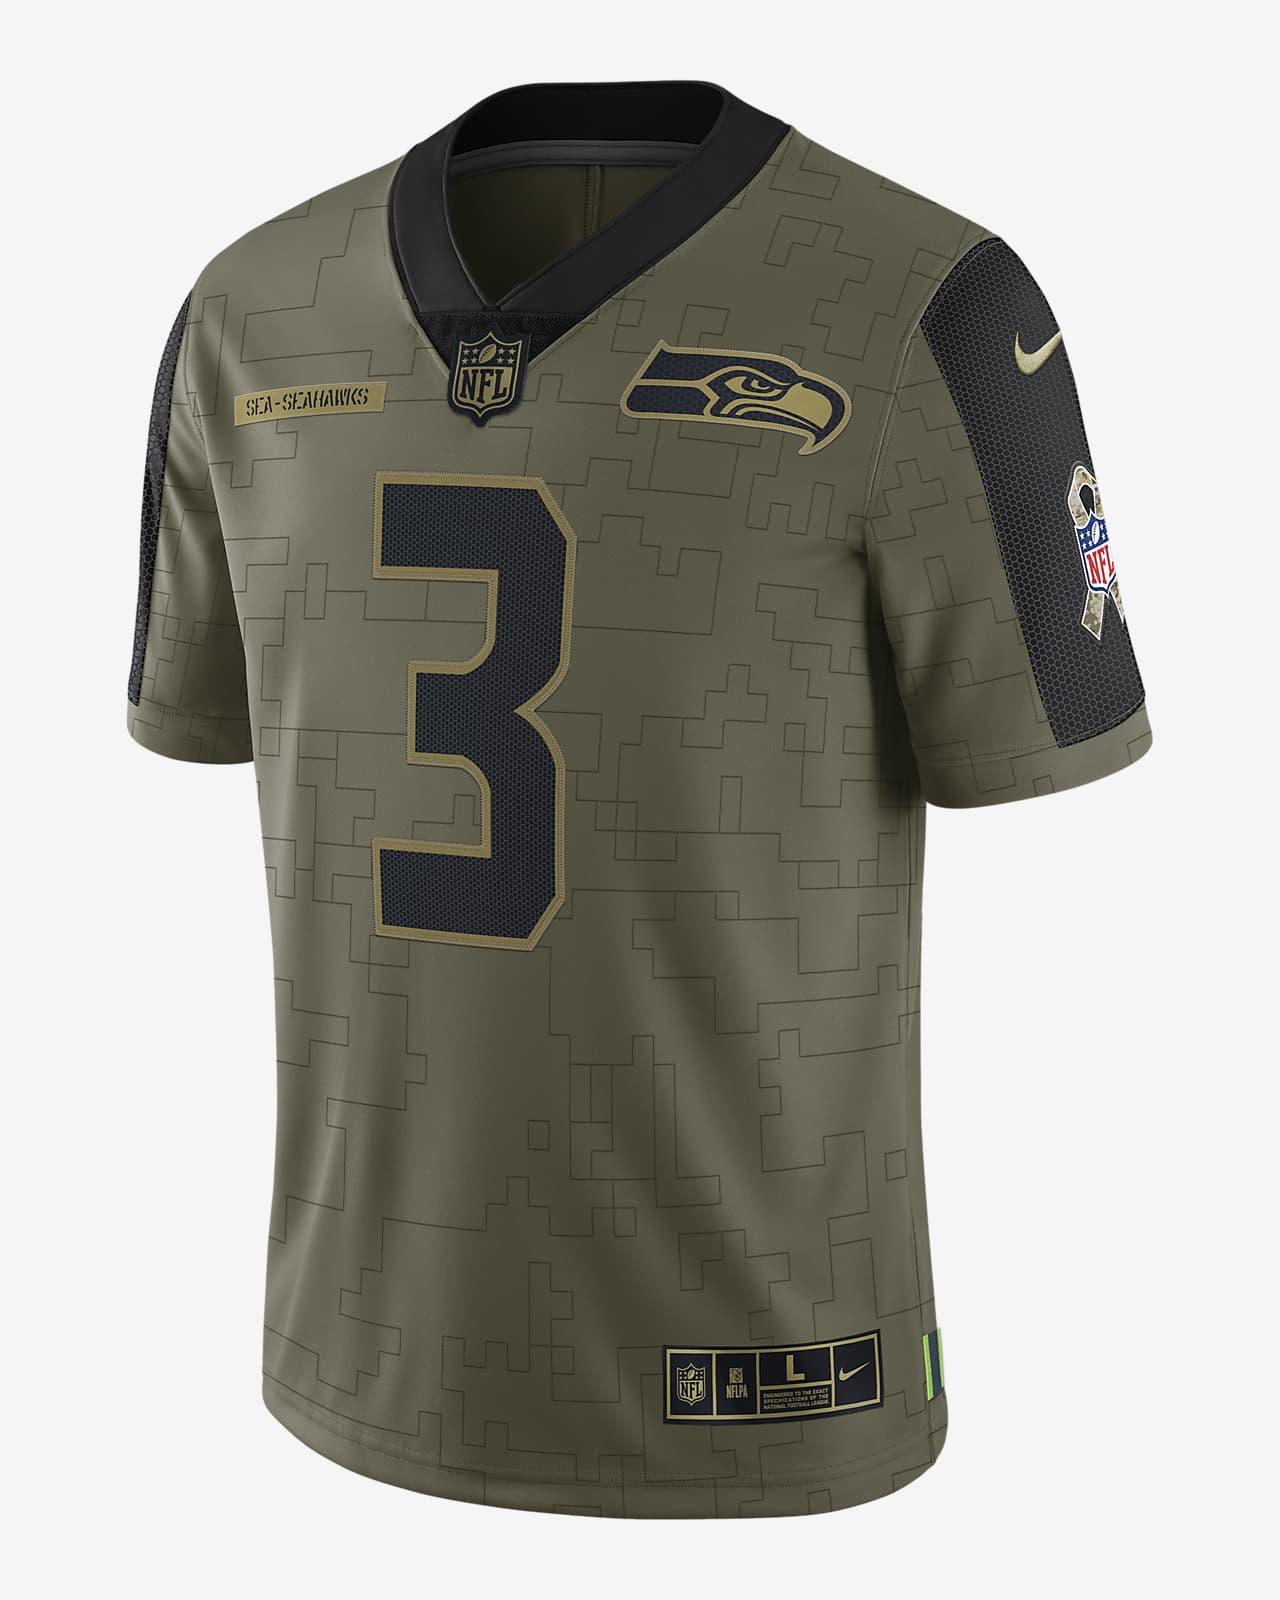 NFL Seattle Seahawks Salute to Service (Russell Wilson) Men's Limited Football Jersey